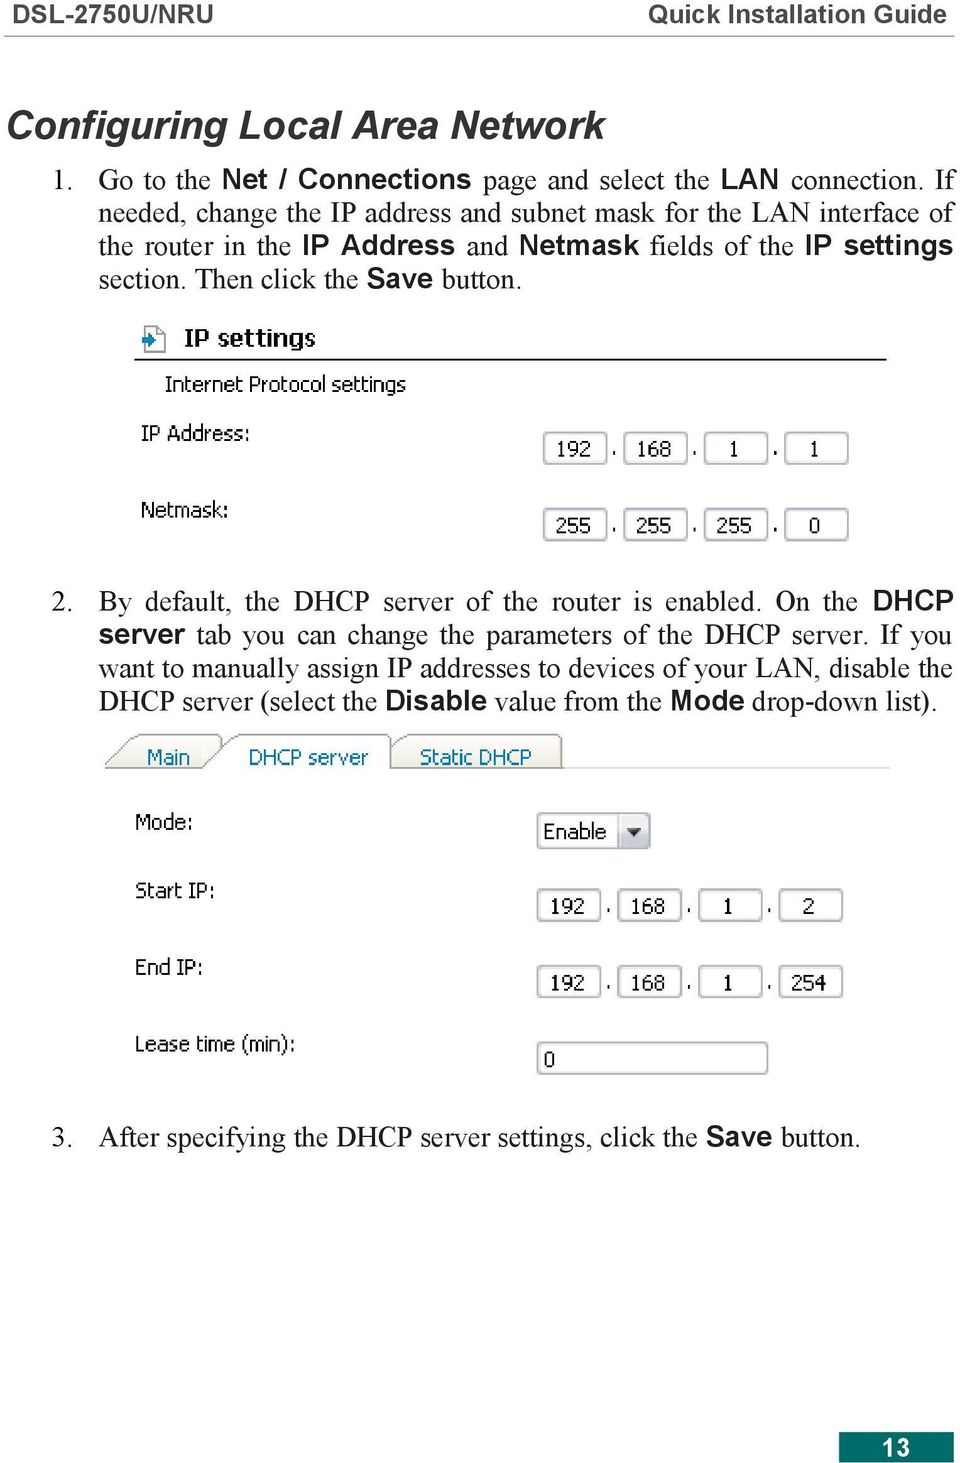 Then click the Save button. 2. By default, the DHCP server of the router is enabled. On the DHCP server tab you can change the parameters of the DHCP server.